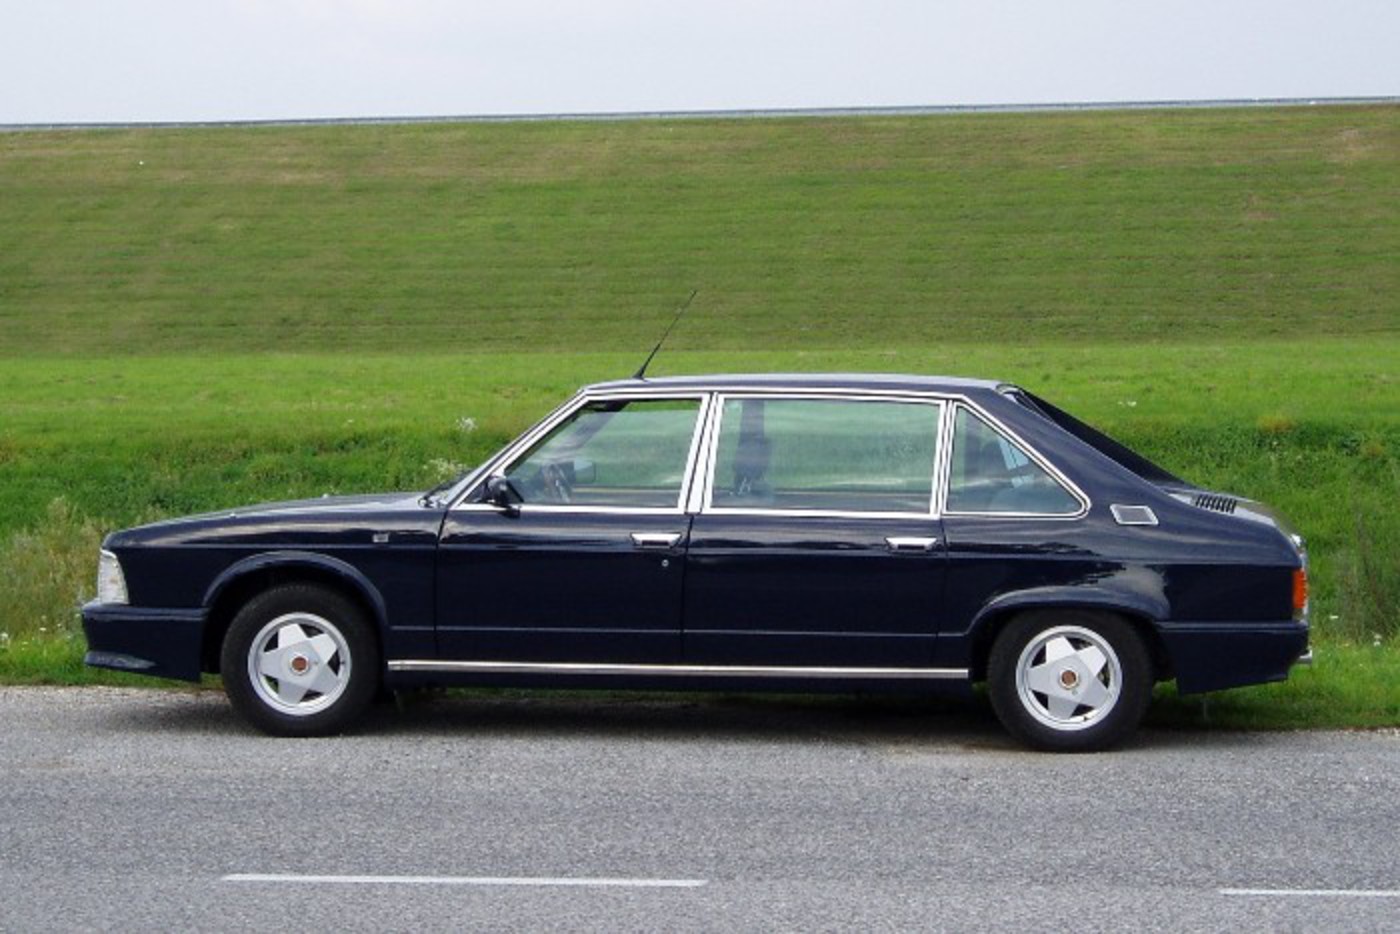 The Ultimate Rear-Engined Sedans: Tatra T613 And T700 | The Truth ...